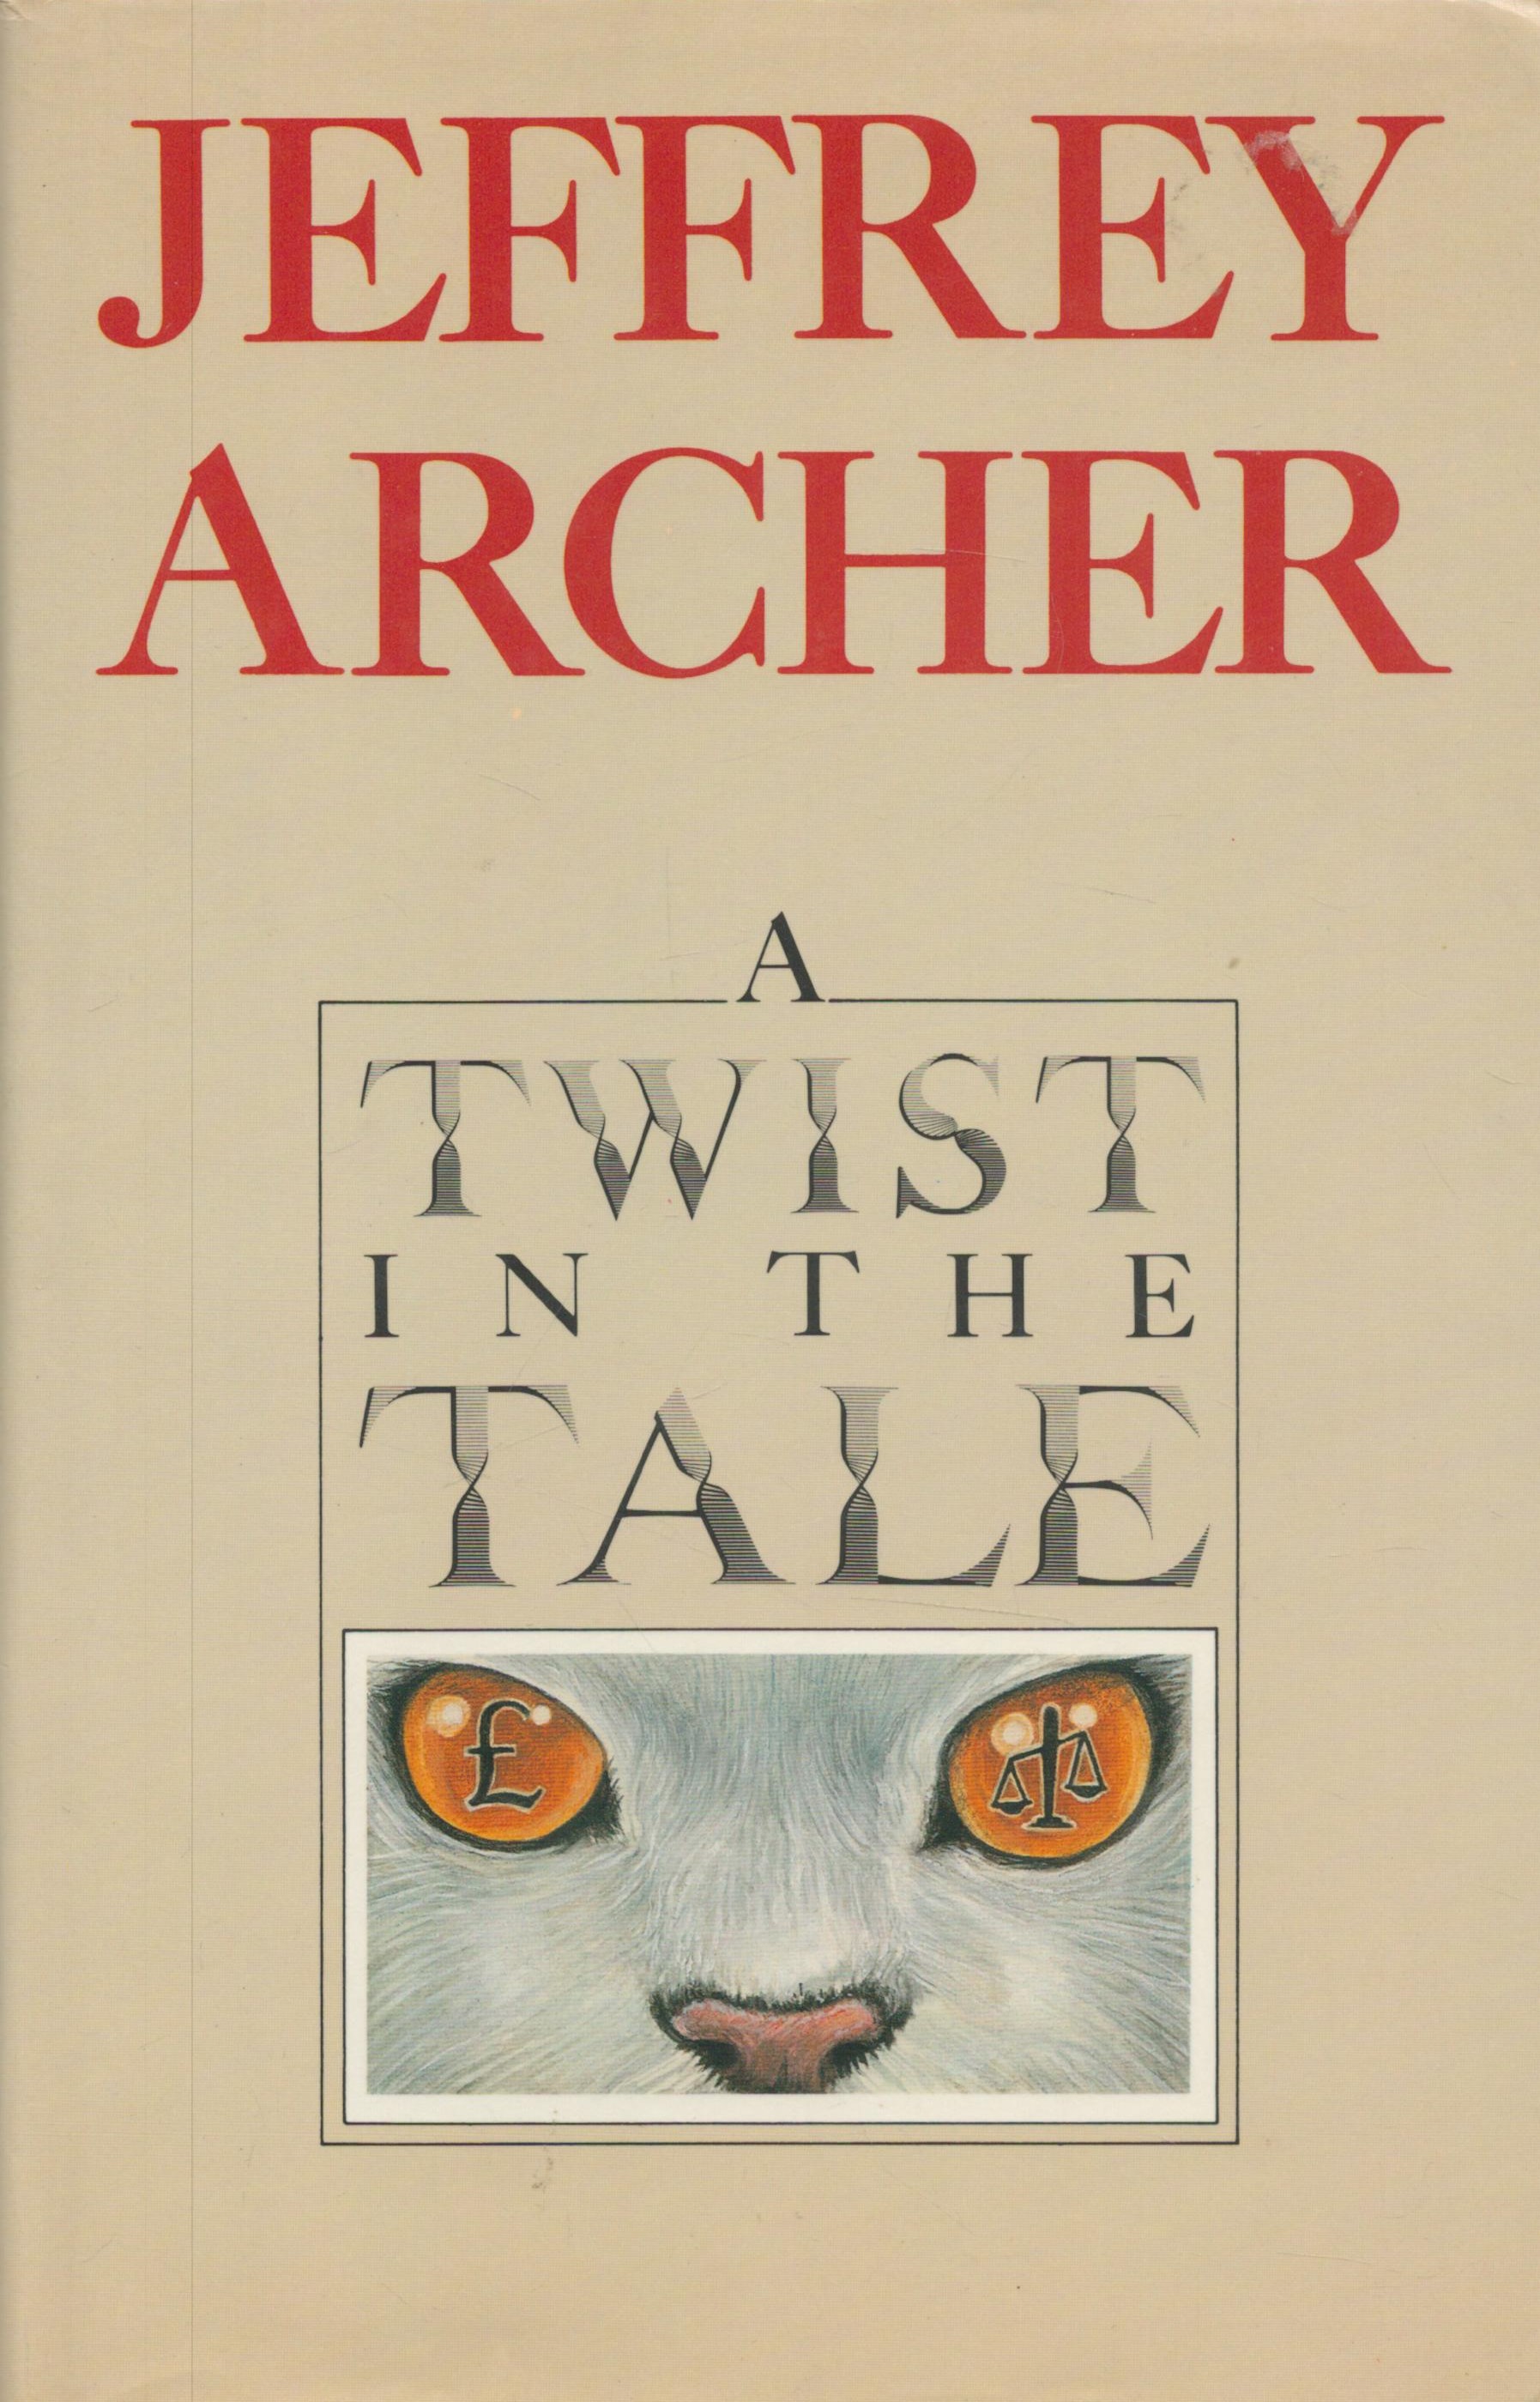 Book. Jeffrey Archer Signed A Twist In The Tale 1st Edition Hardback Book. Published in 1988.